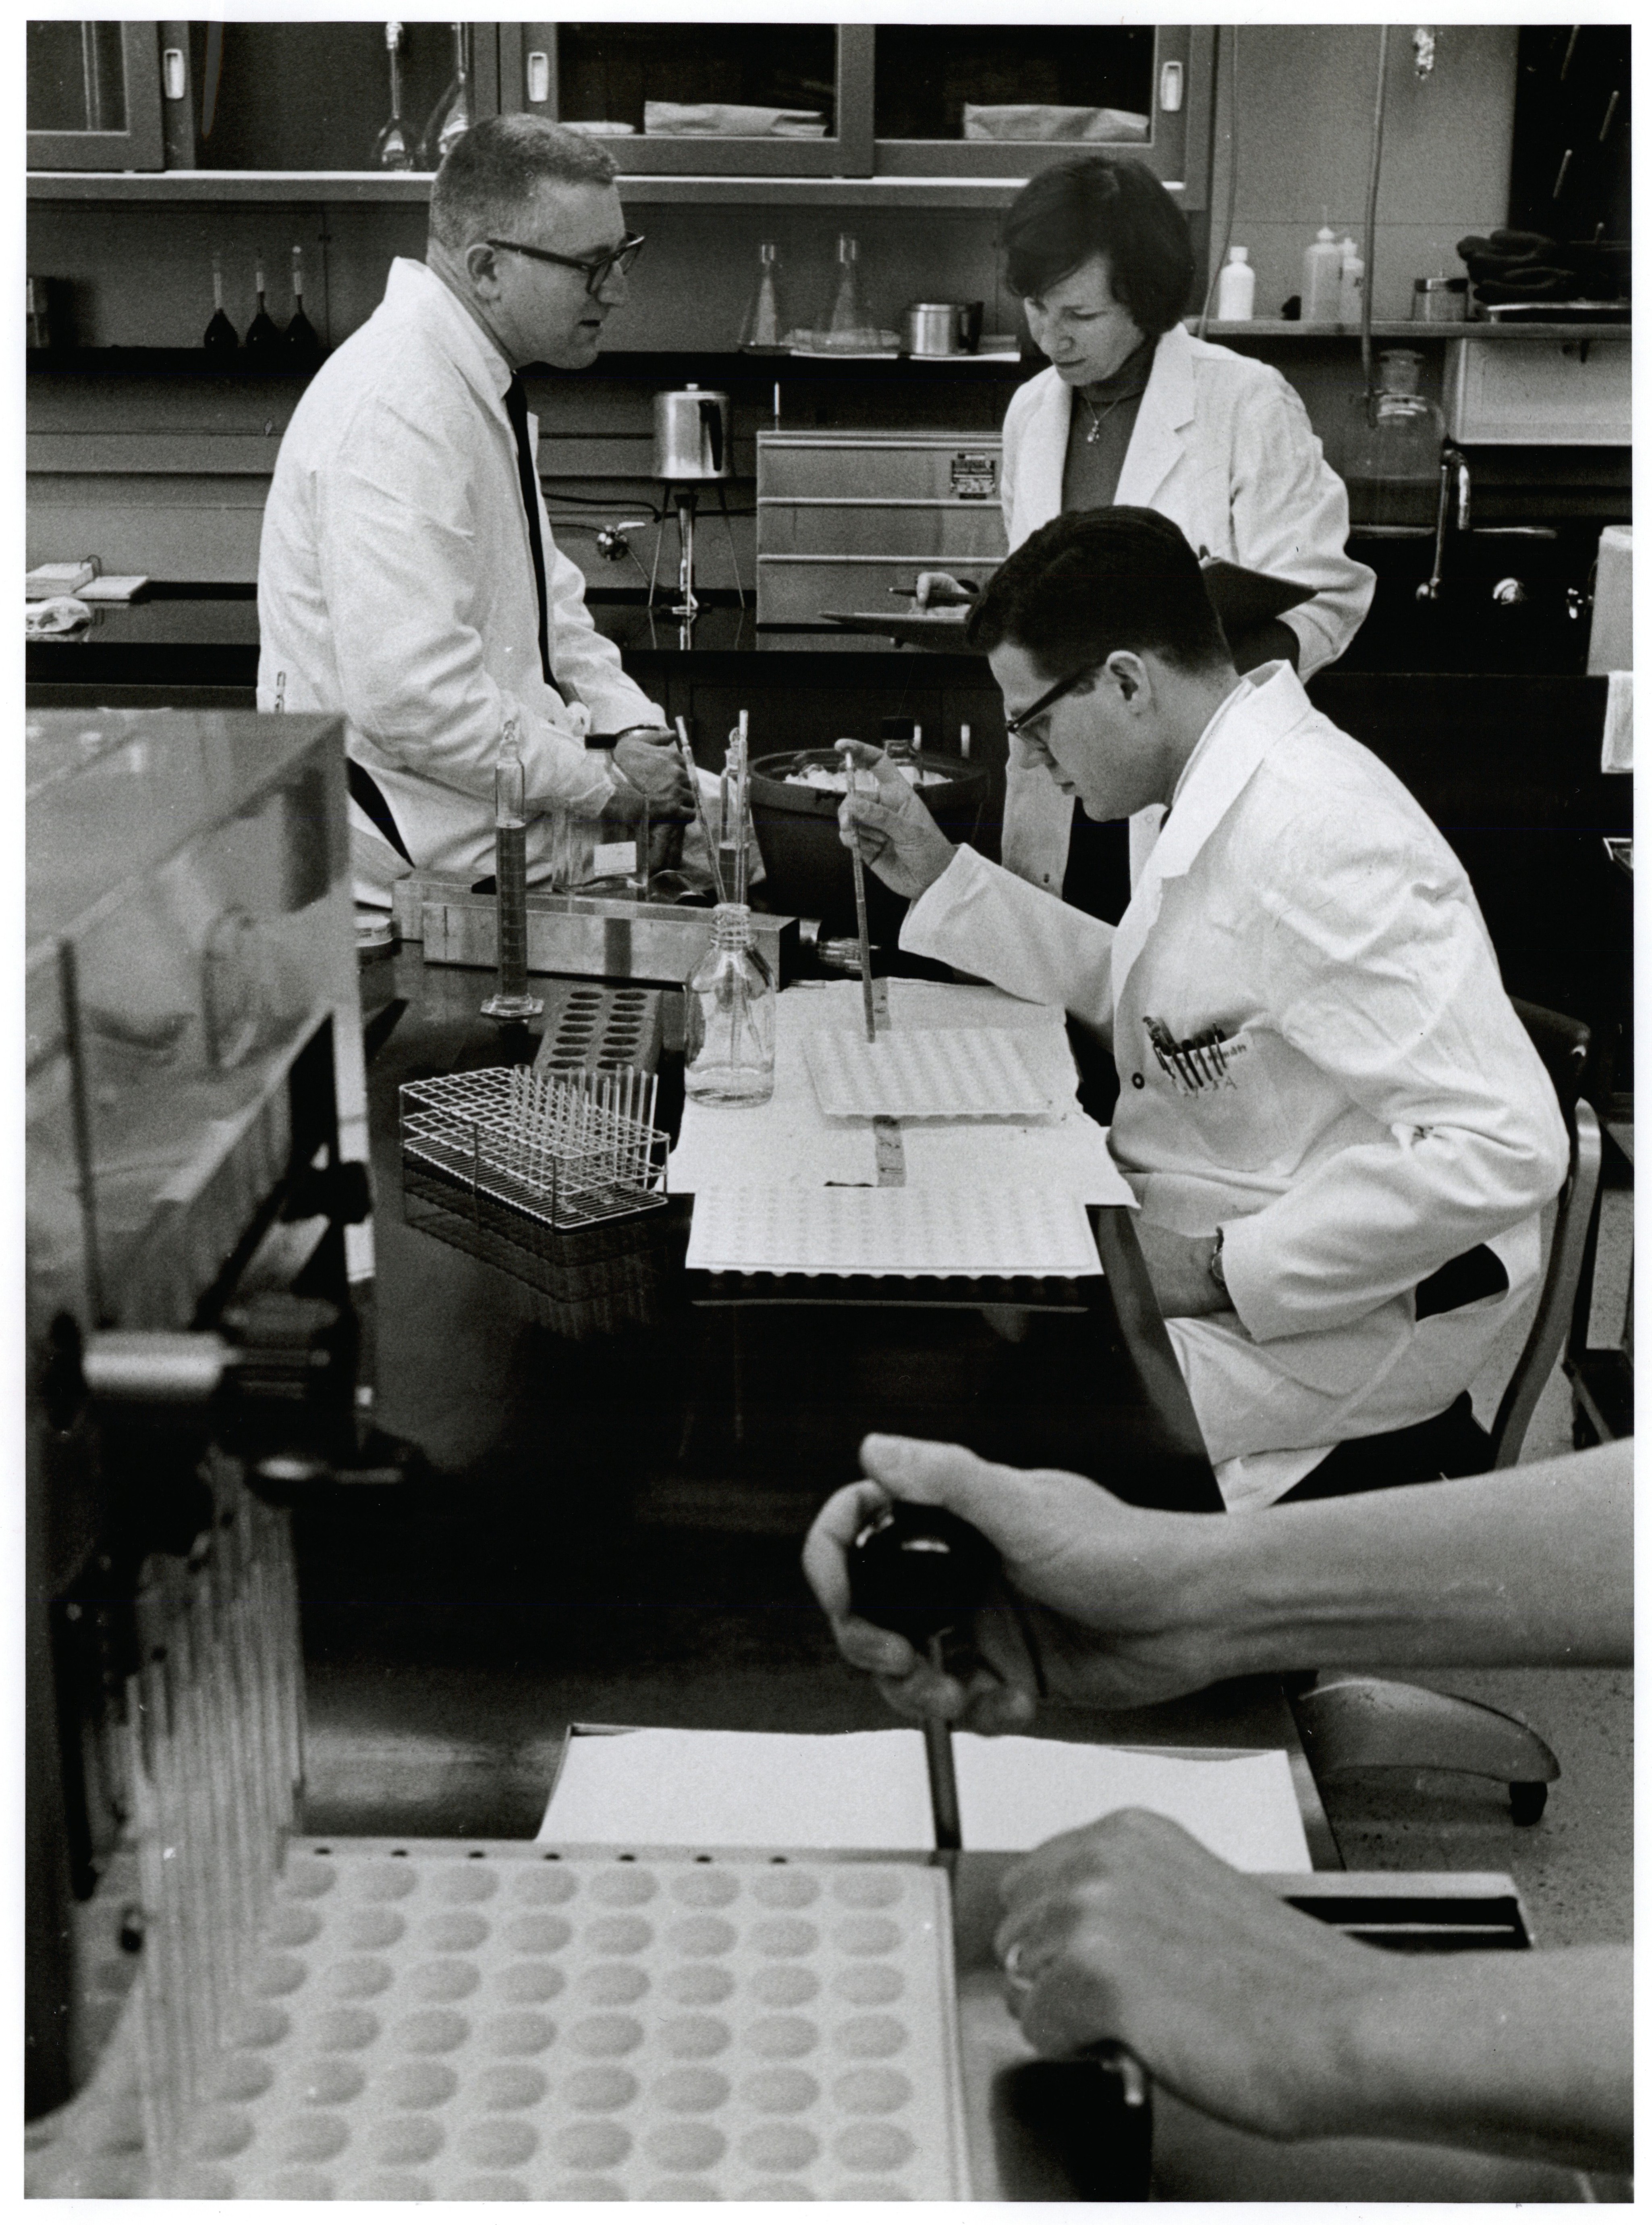 Three people in lab coats engaged in conducting research